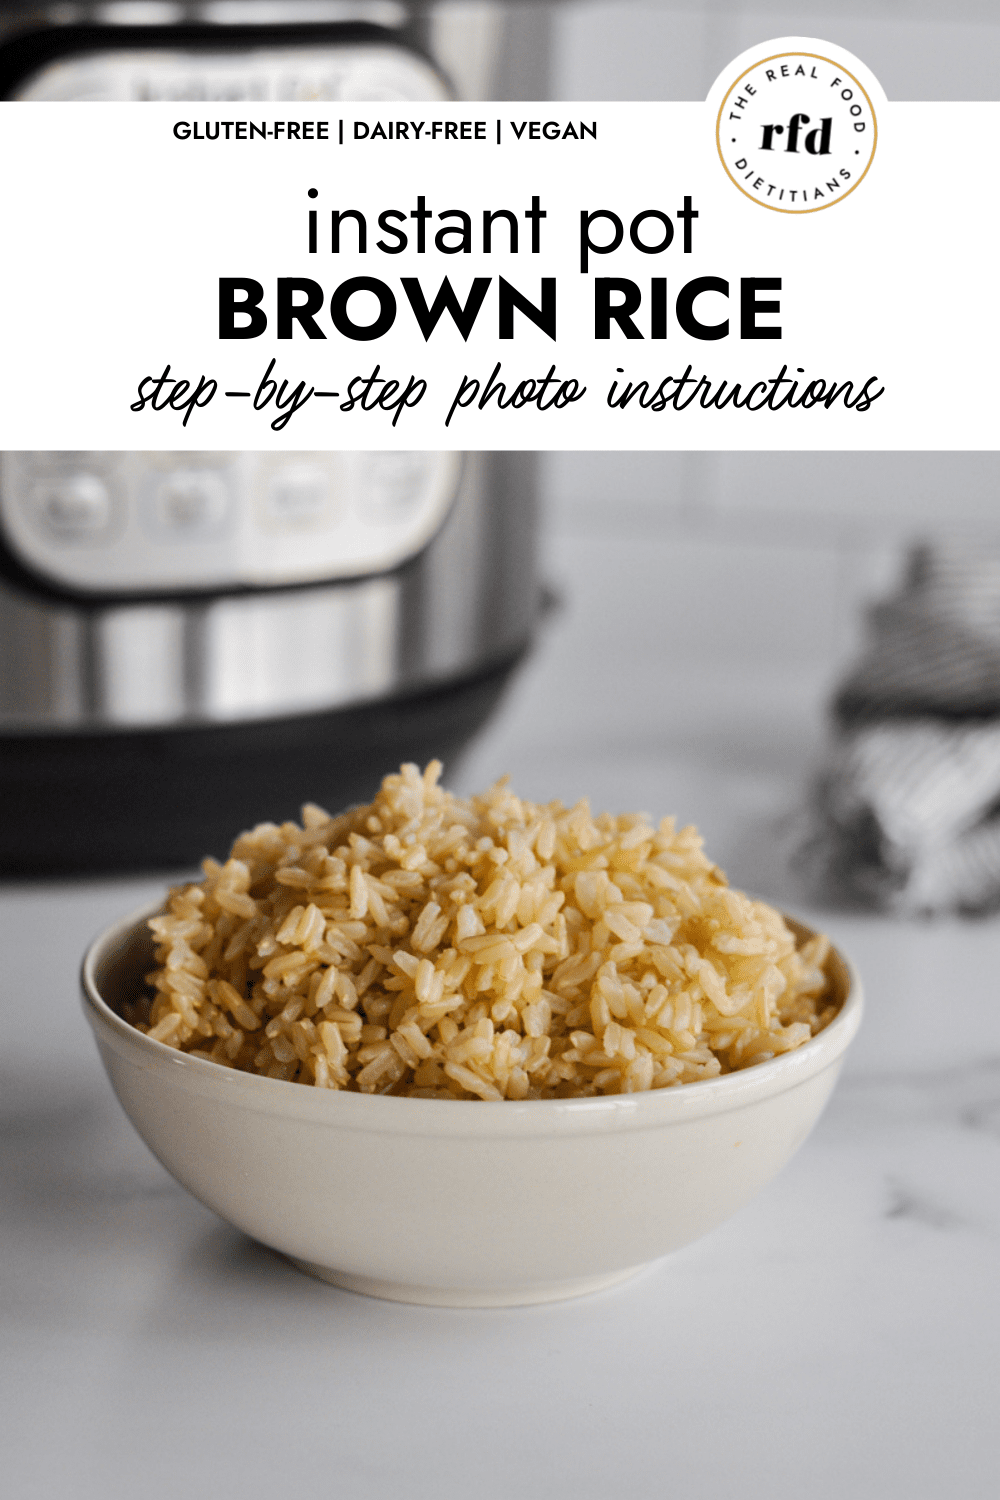 https://therealfooddietitians.com/wp-content/uploads/2022/01/Instant-Pot-Brown-Rice-1000-x-1500-px.png